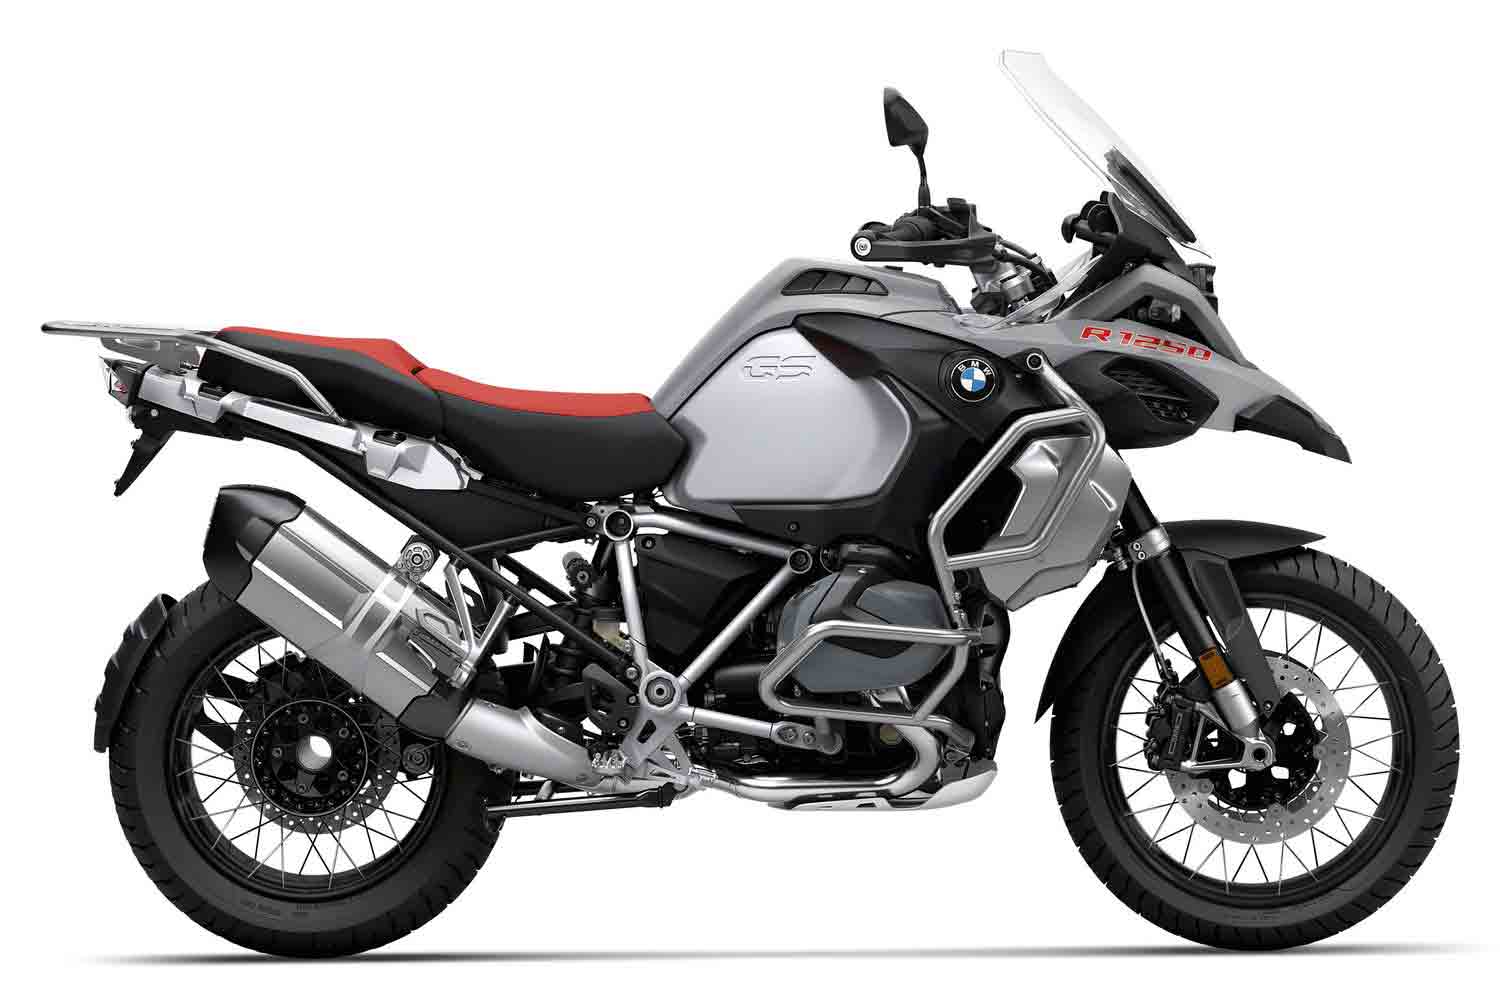 BMW R 1250 GS and Adventure. Photo: Disclosure